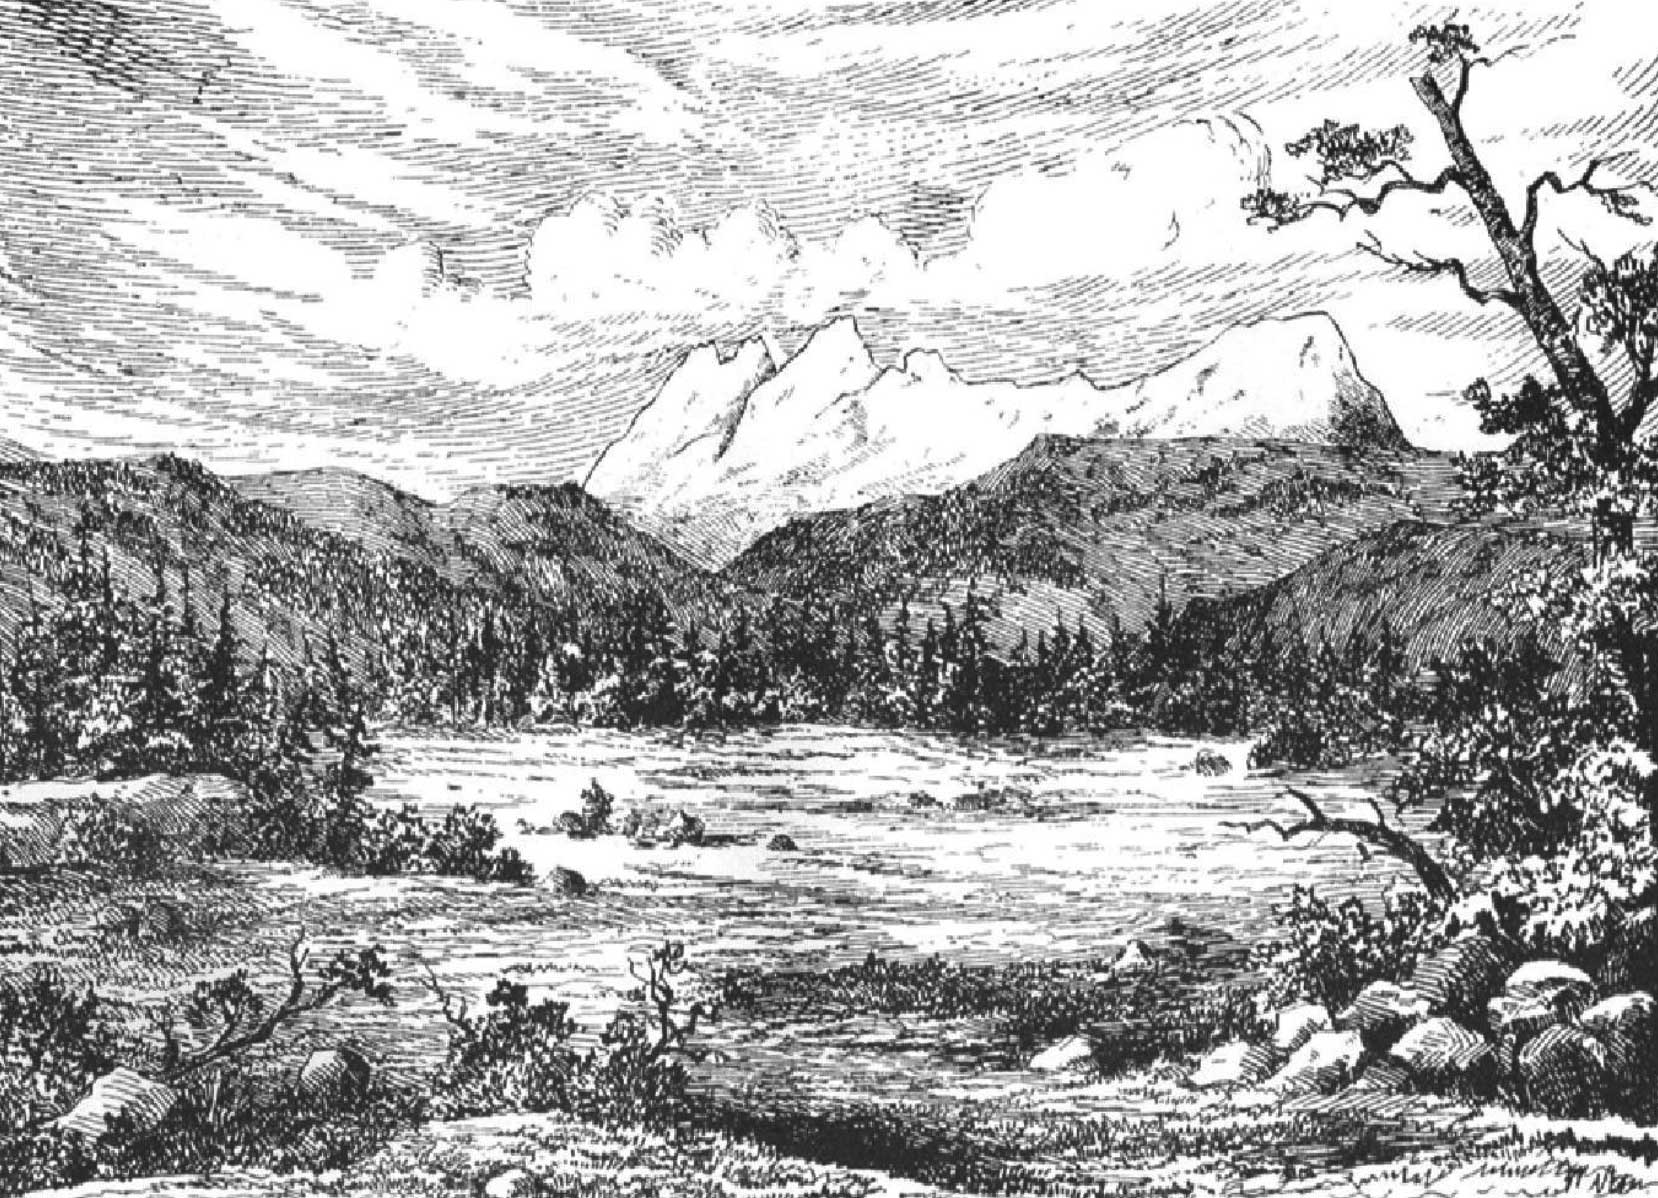 The Yellowhead Pass. Sir Sandford Fleming, based on an expedition in 1872